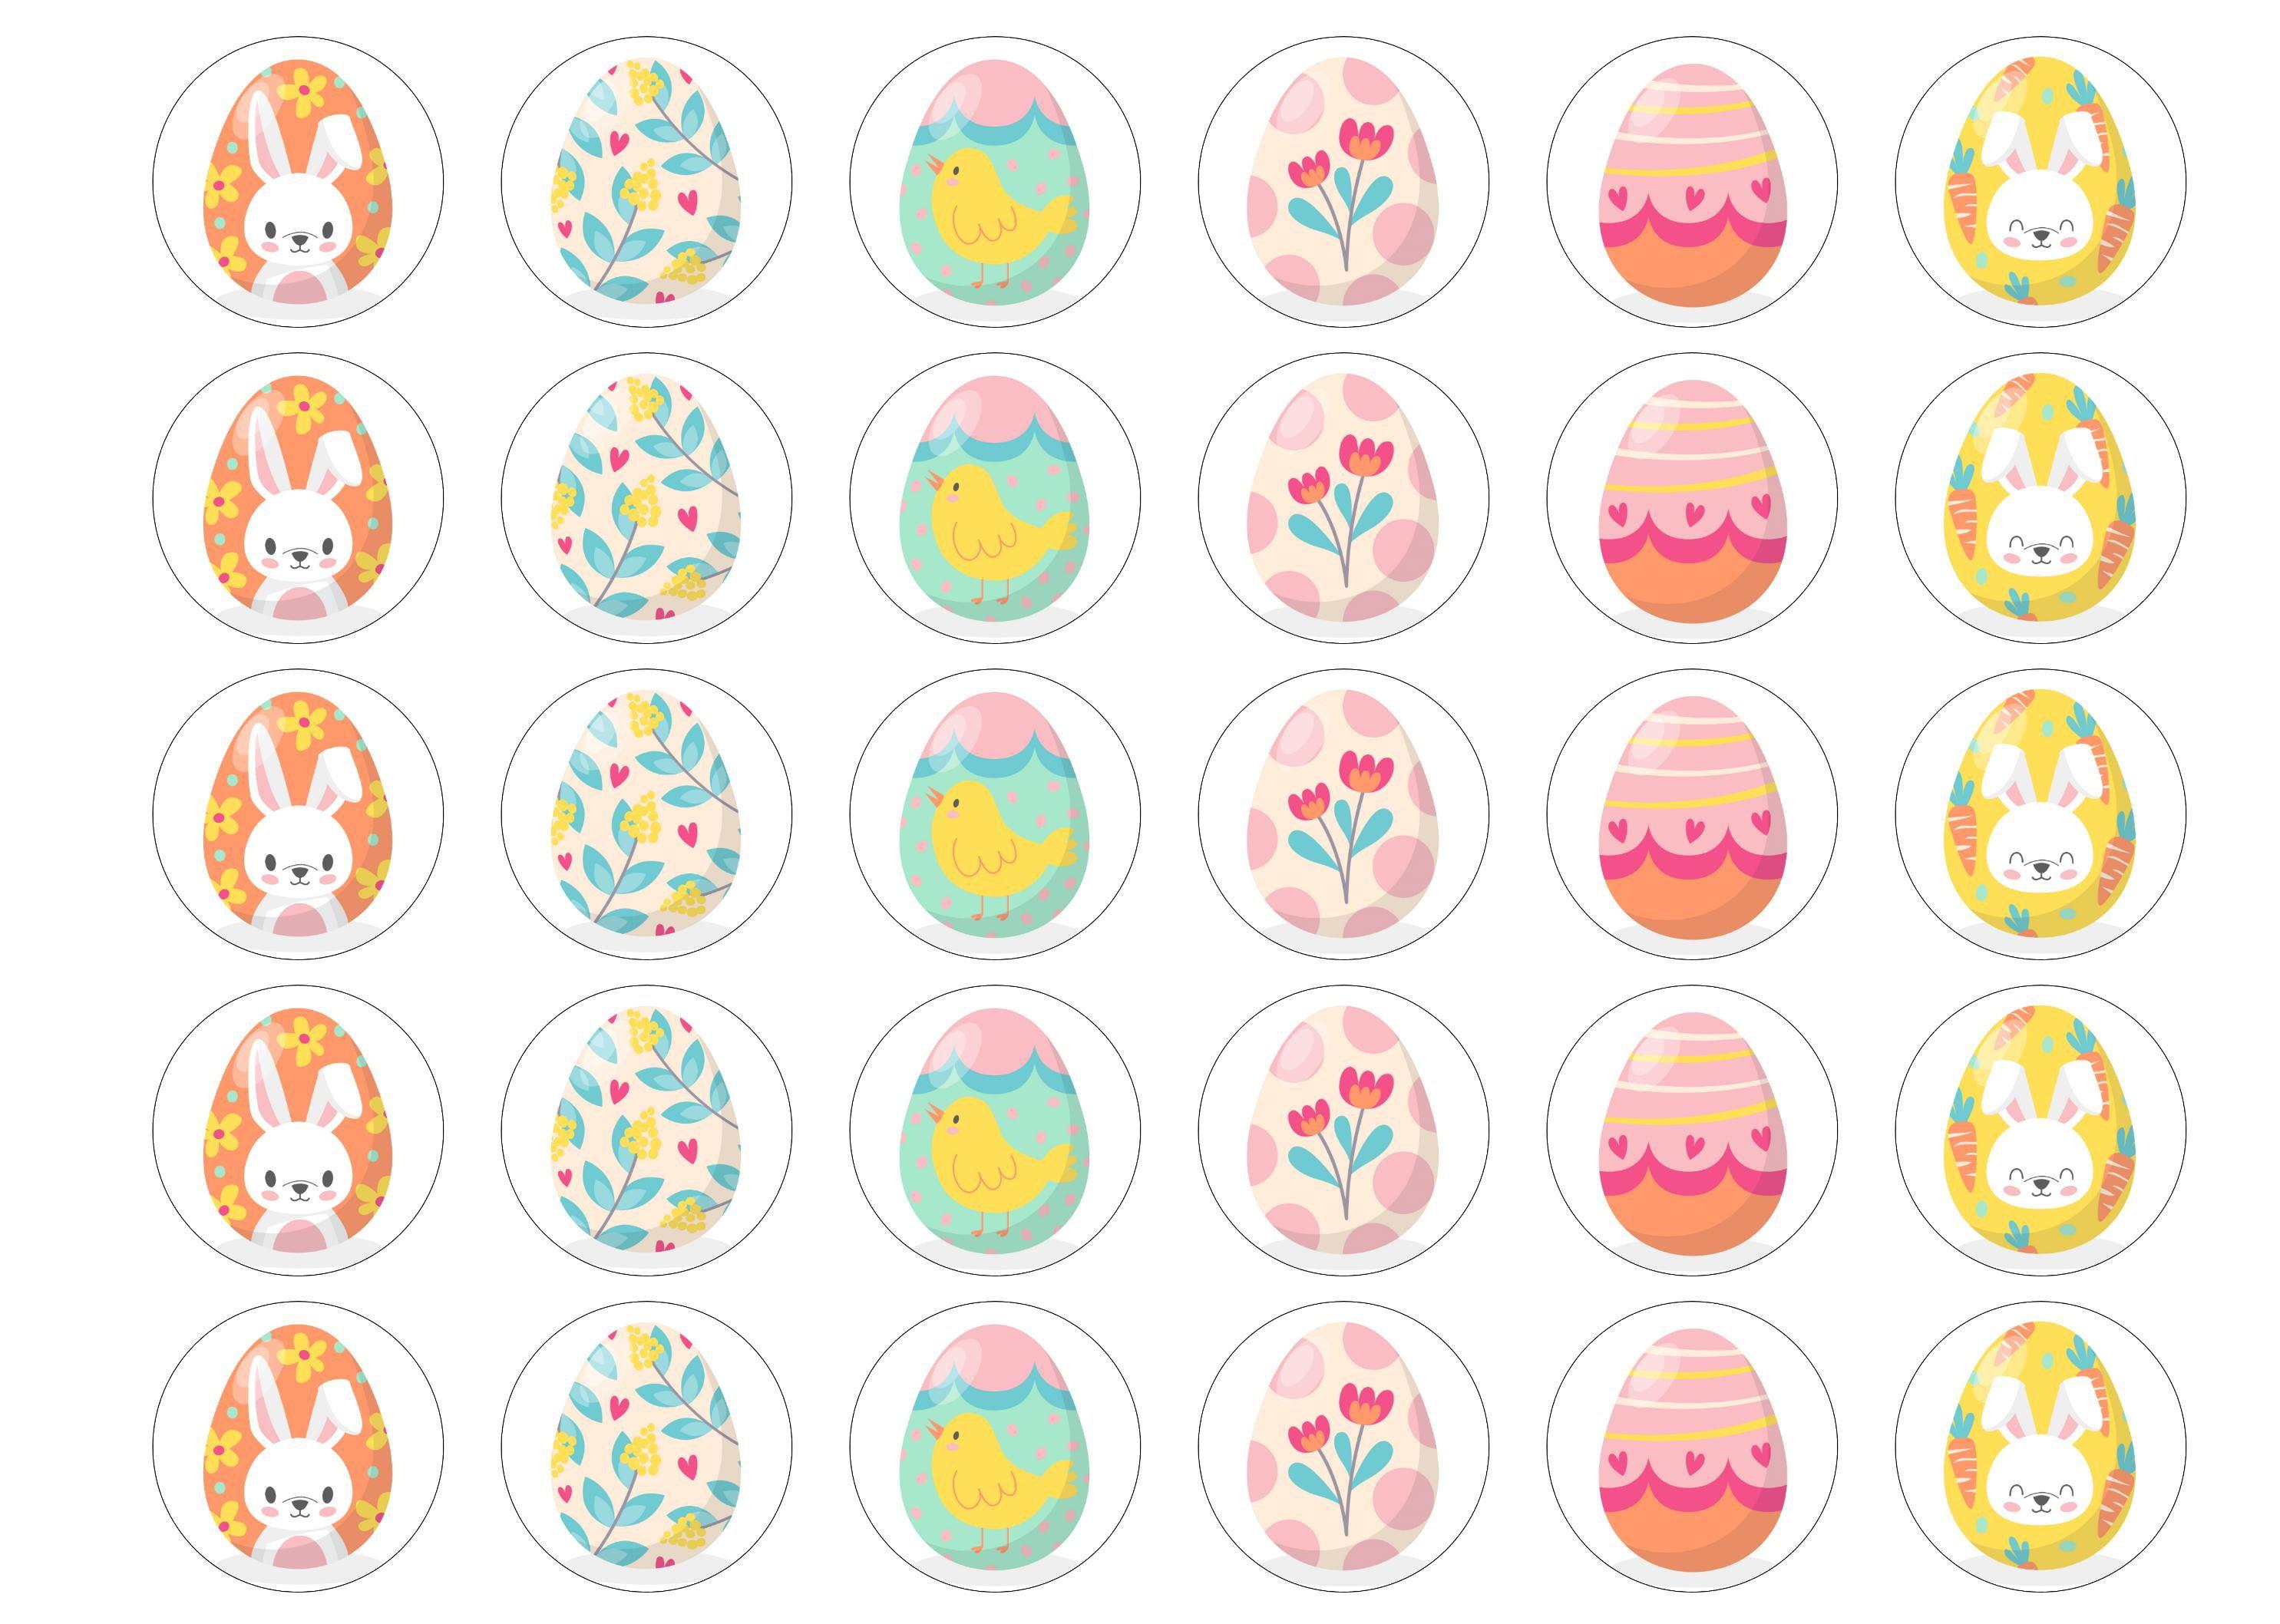 30 edible toppers with easter egg patterns